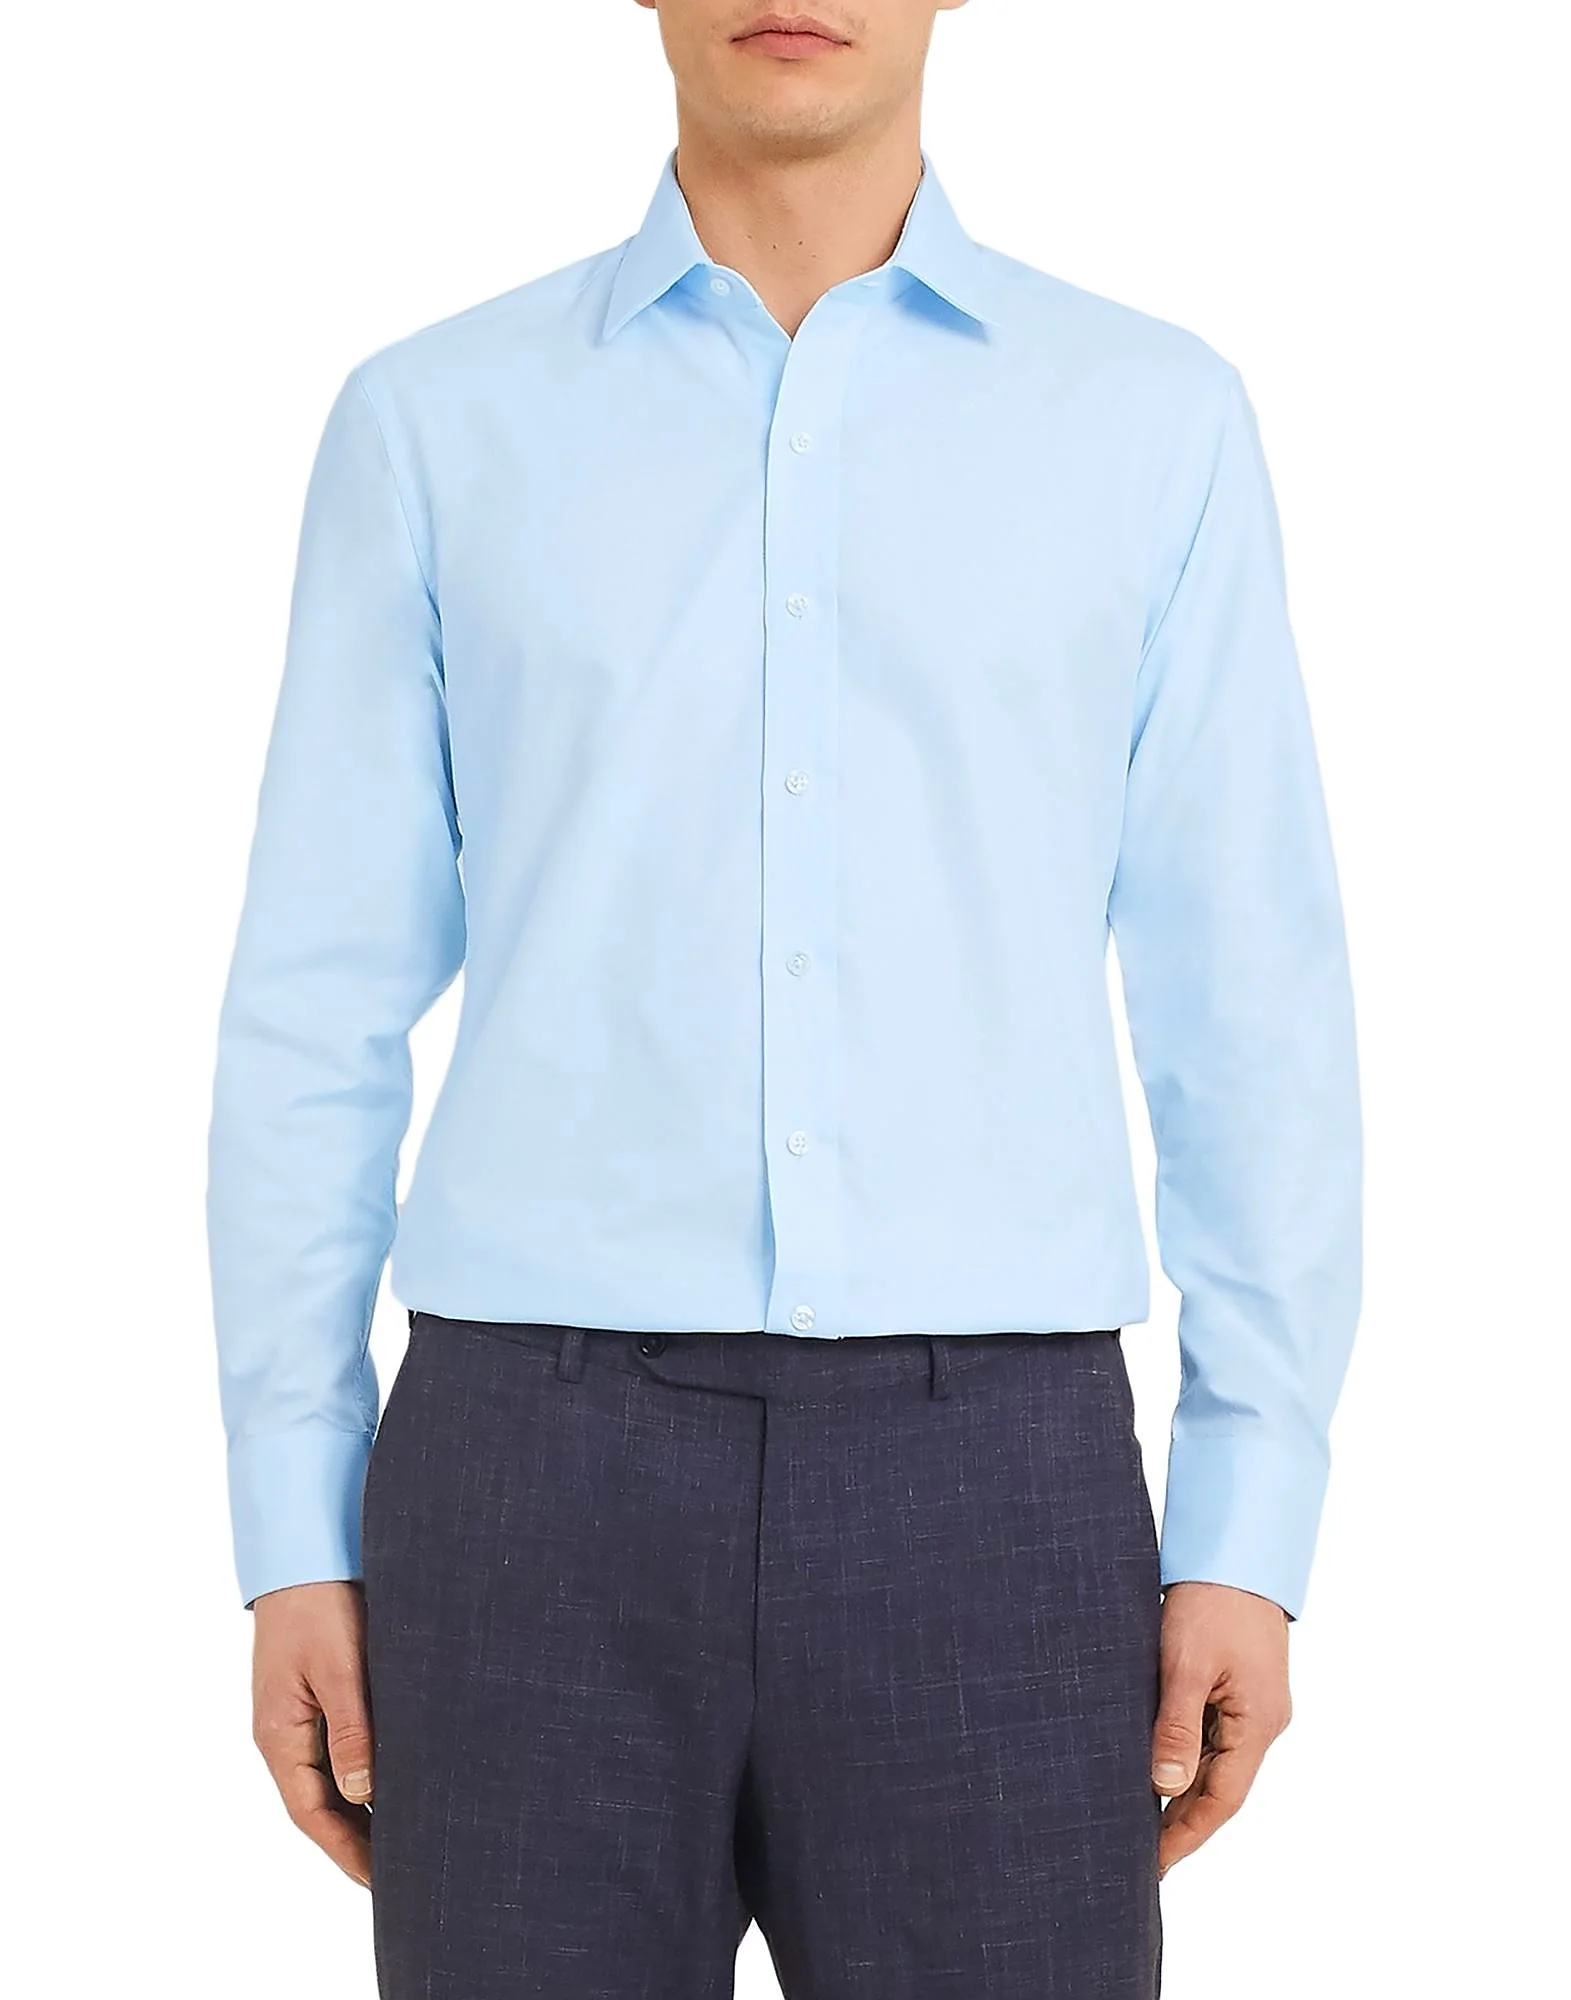 Wholesale Mens Solid Color Office Dress Shirt Manufacturers In Bangladesh Factory Supplier